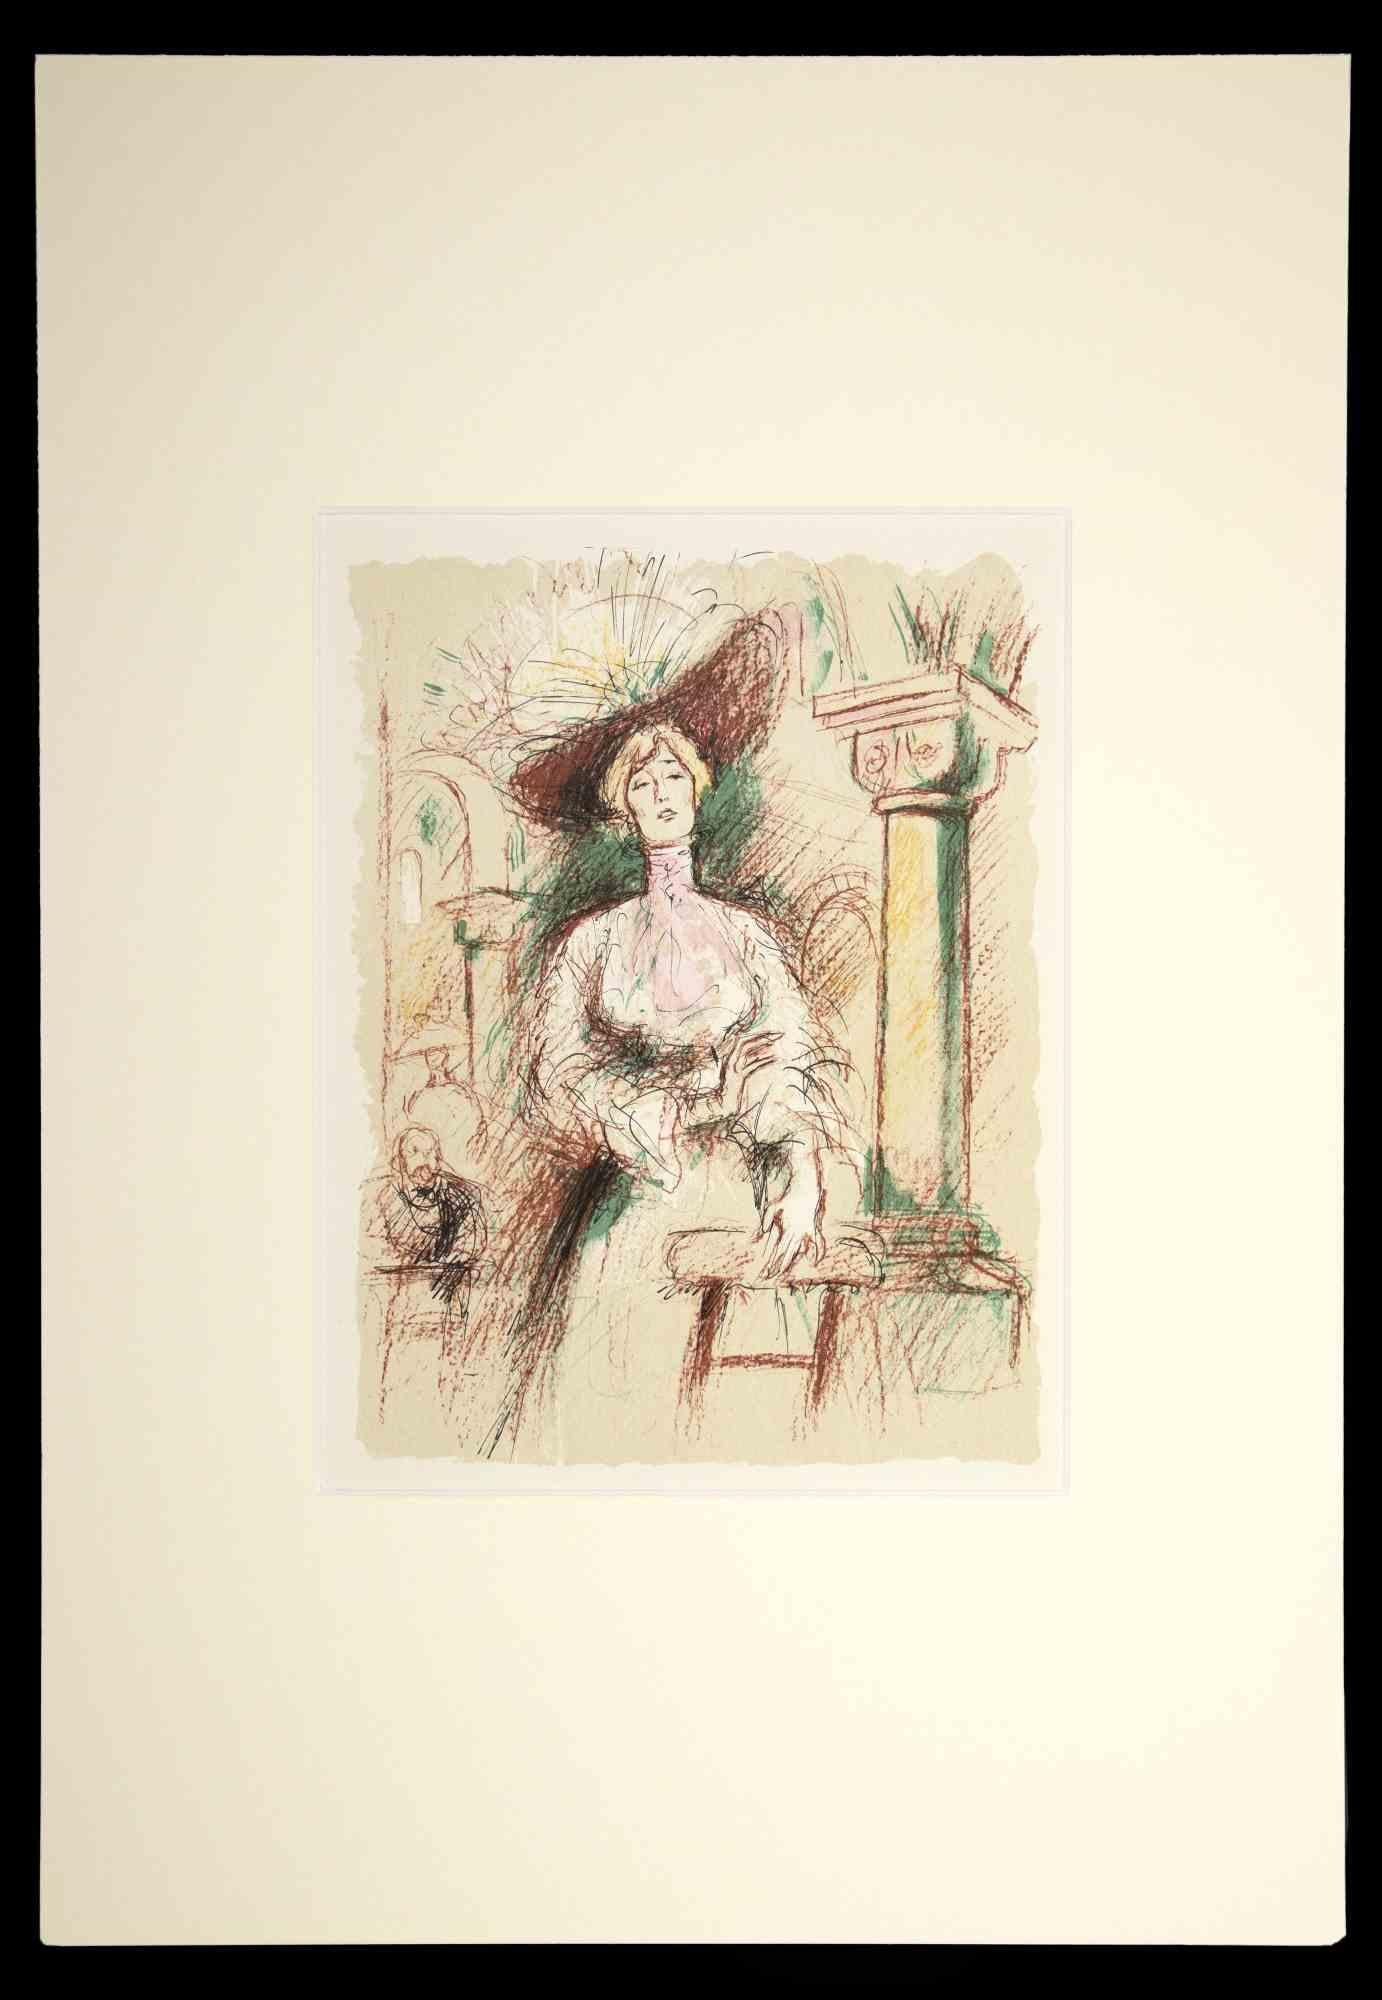 Unknown Figurative Art - The Devoted Lady - Original Drawing - Early 20th Century